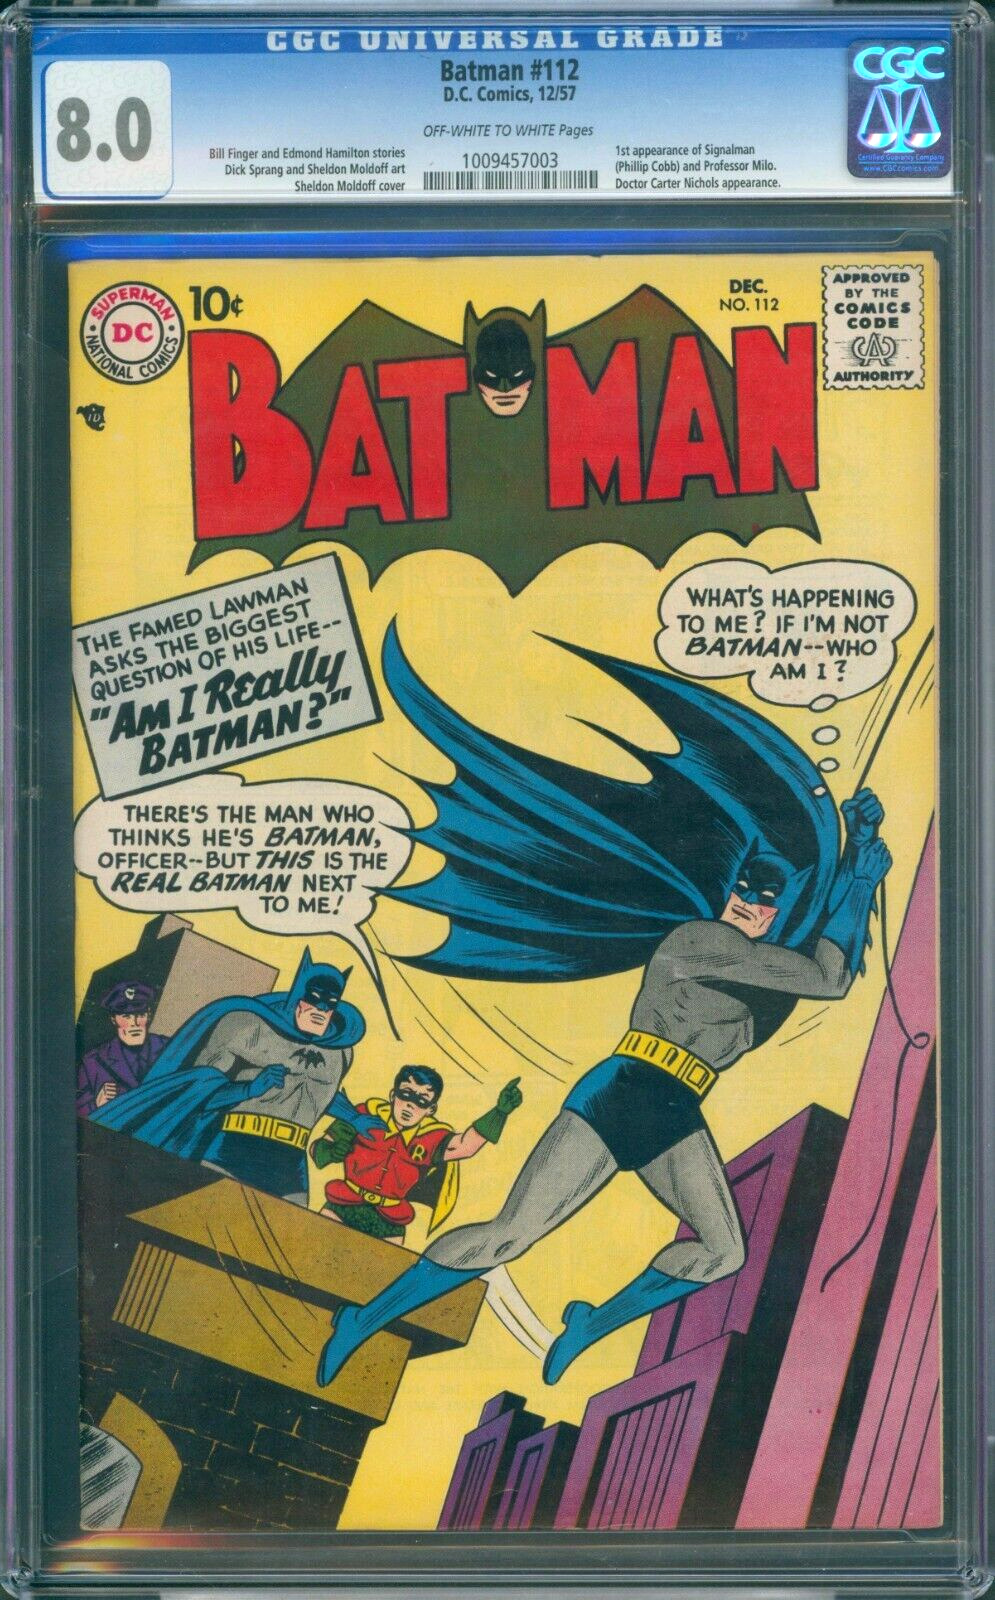 BATMAN #112  CGC 8.0 VF  NICE OFF WHITE TO WHITE PAGES  FROM THE TOUGH 1957 ERA